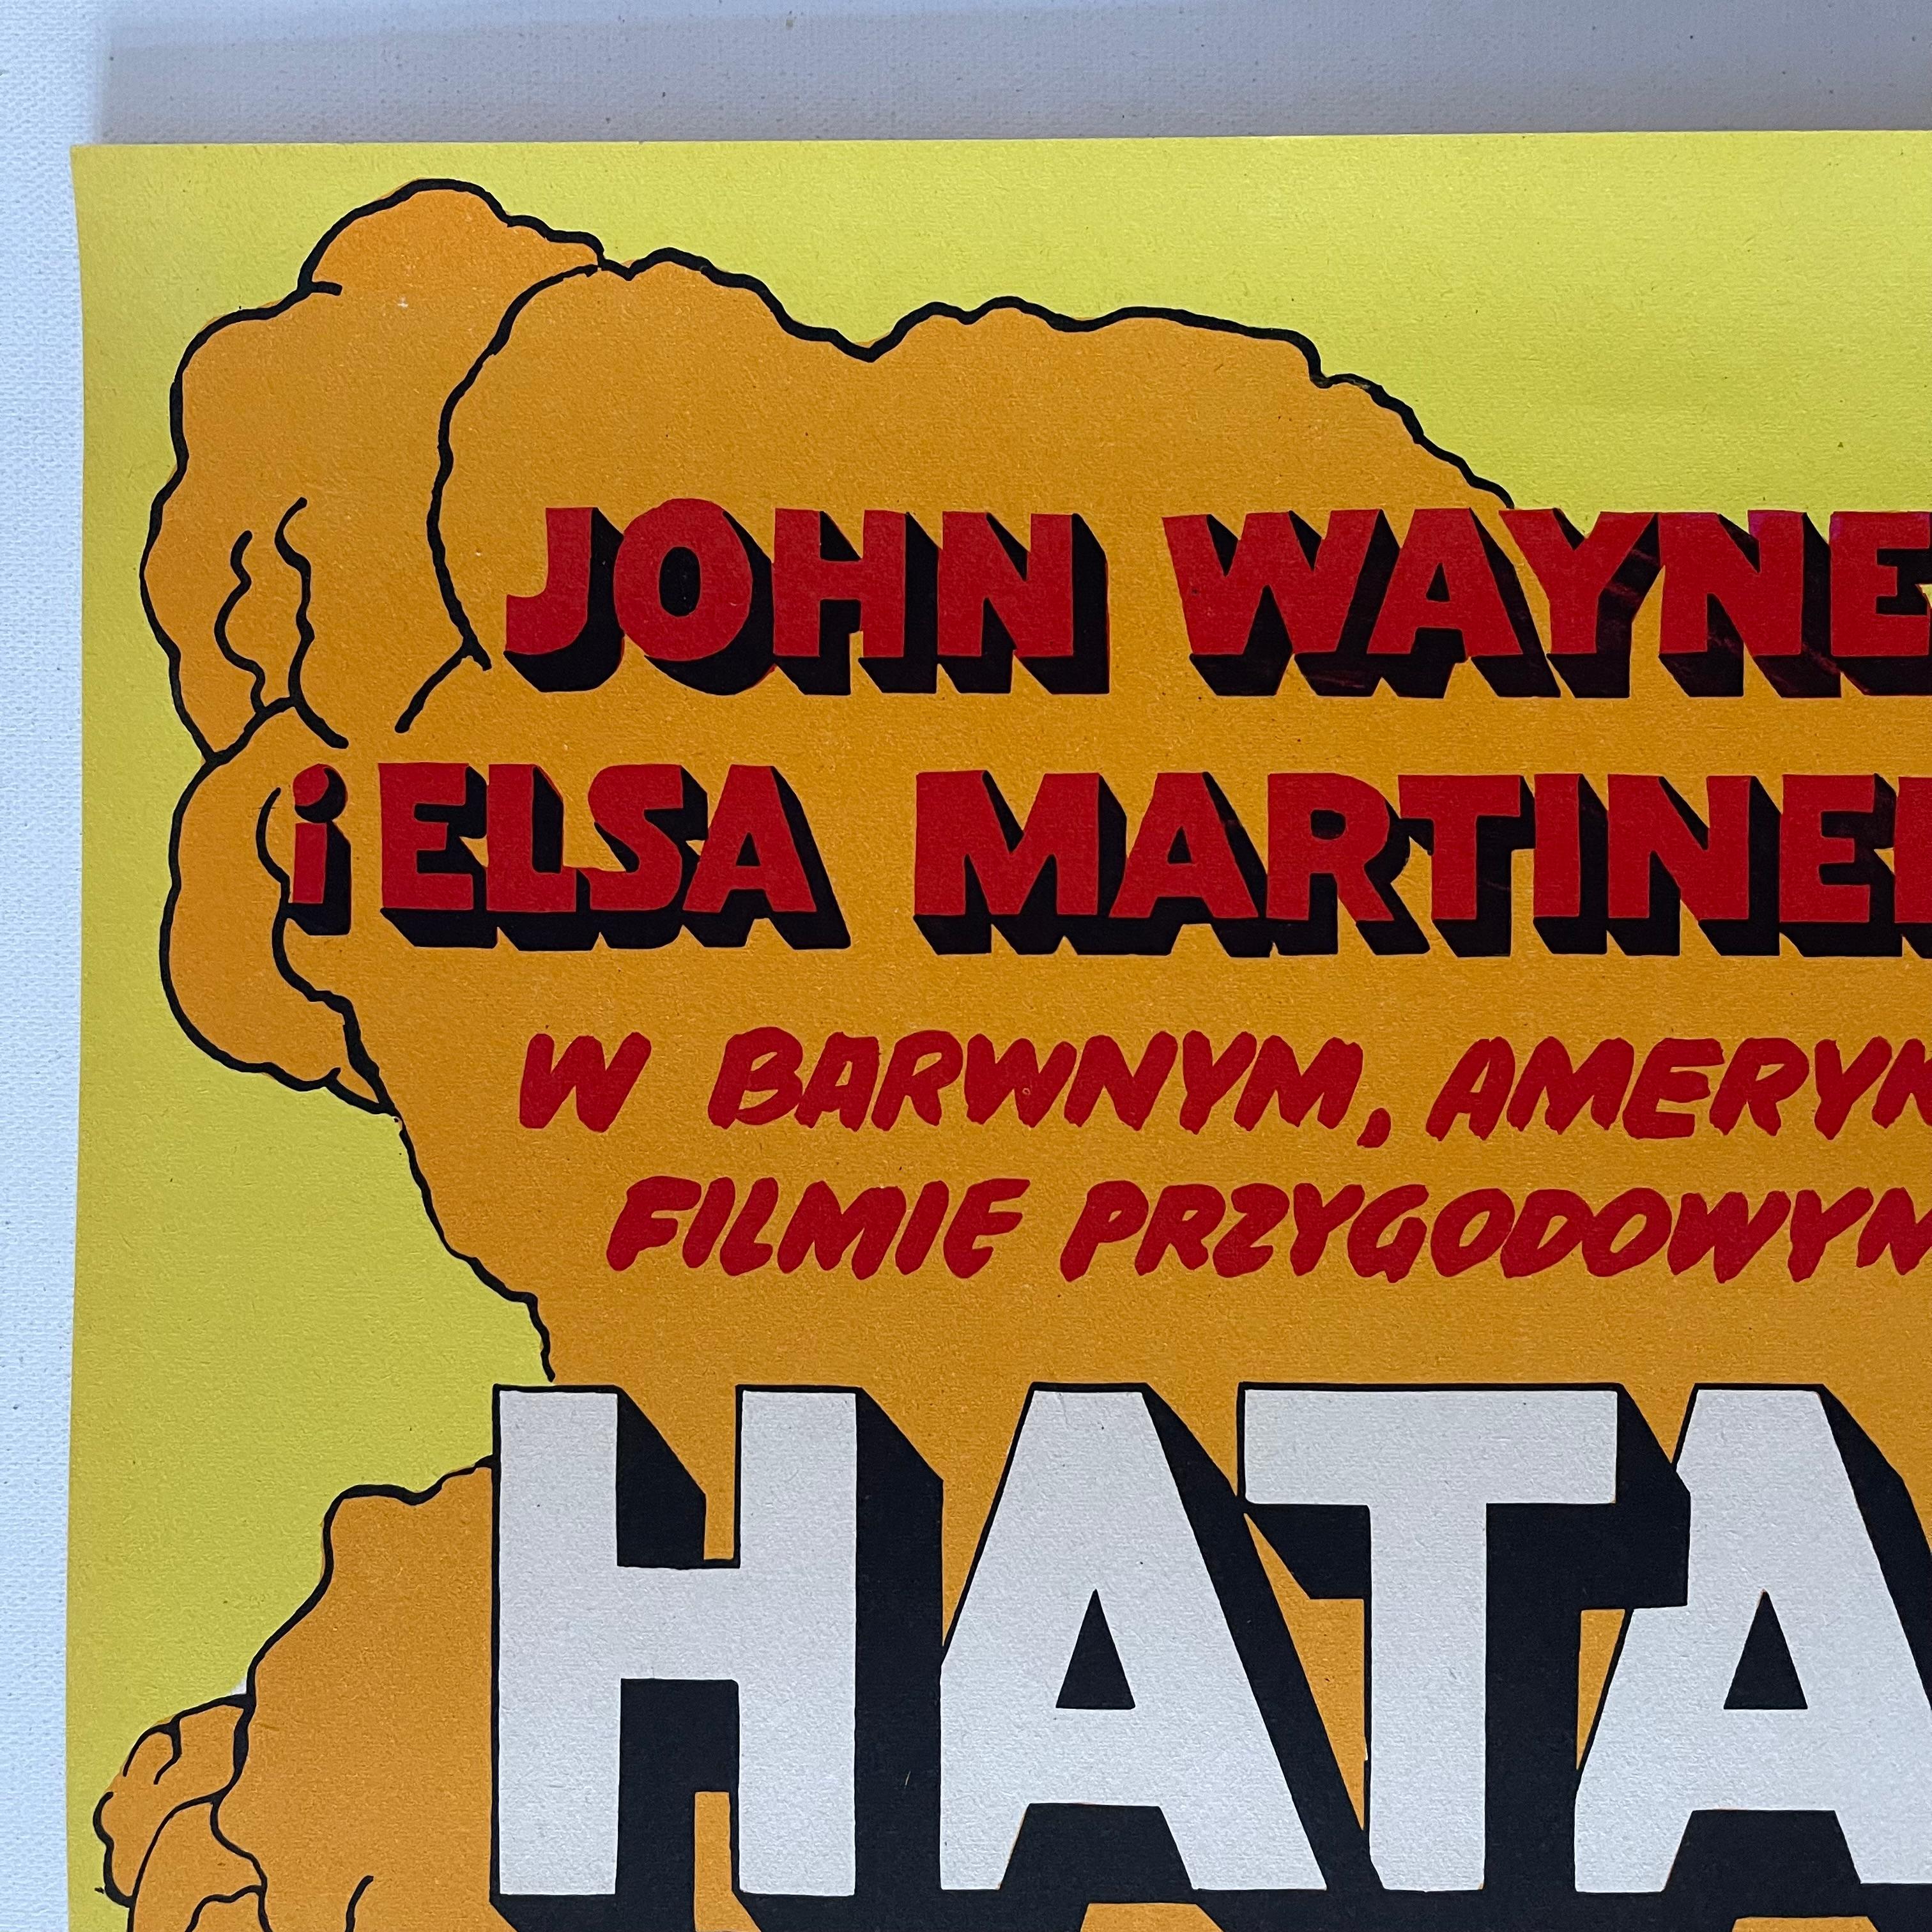 This original 1968 vintage poster by Waldemar Swierzy has such glorious bold colours and graphics. He designed it for the 1962 American movie directed by Howard Hawks and starring John Wayne and Elsa Martinelli.

Polish A1 size: 58 x 83.5 cm